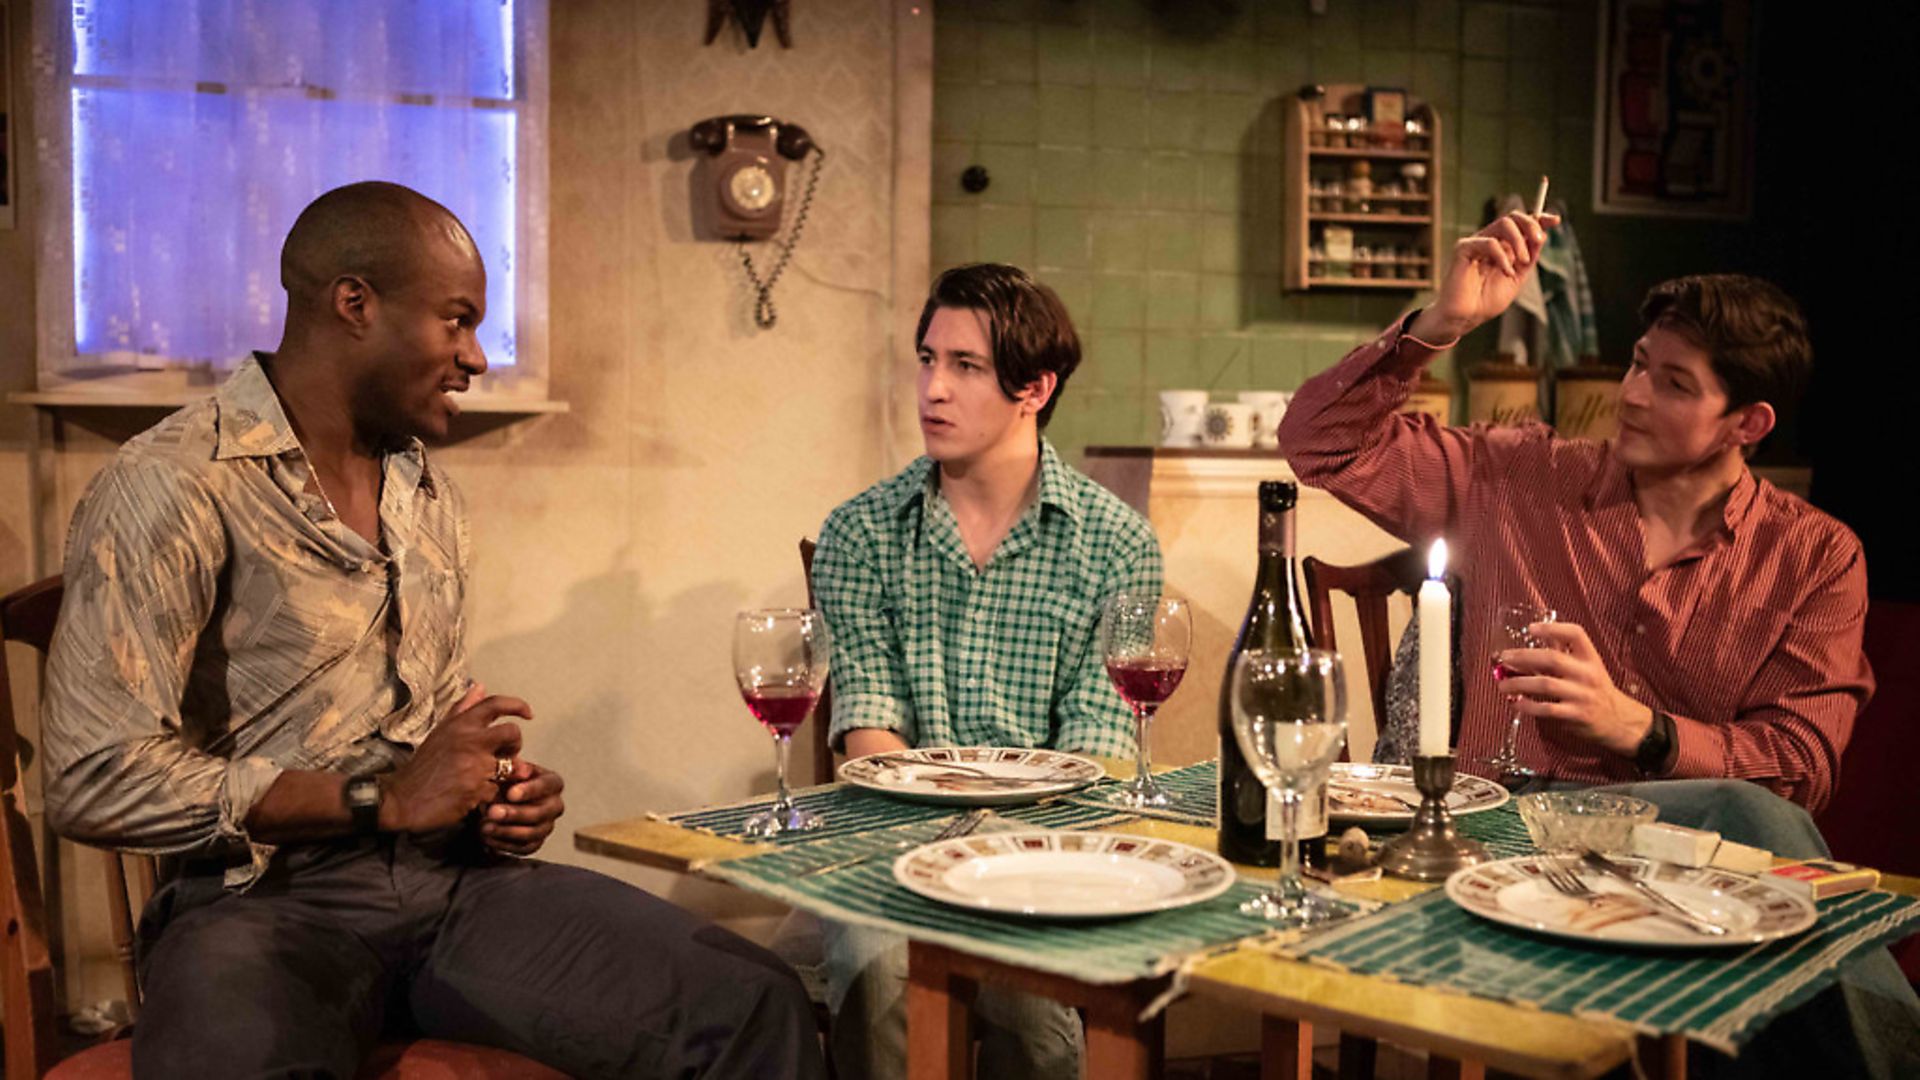 Stanton Plummer-Cambridge as Greg, Jonah Rzeskiewicz as Robert & Lee Knight as Tony in Coming Clean. Photograph: Ali Wright. - Credit: Archant